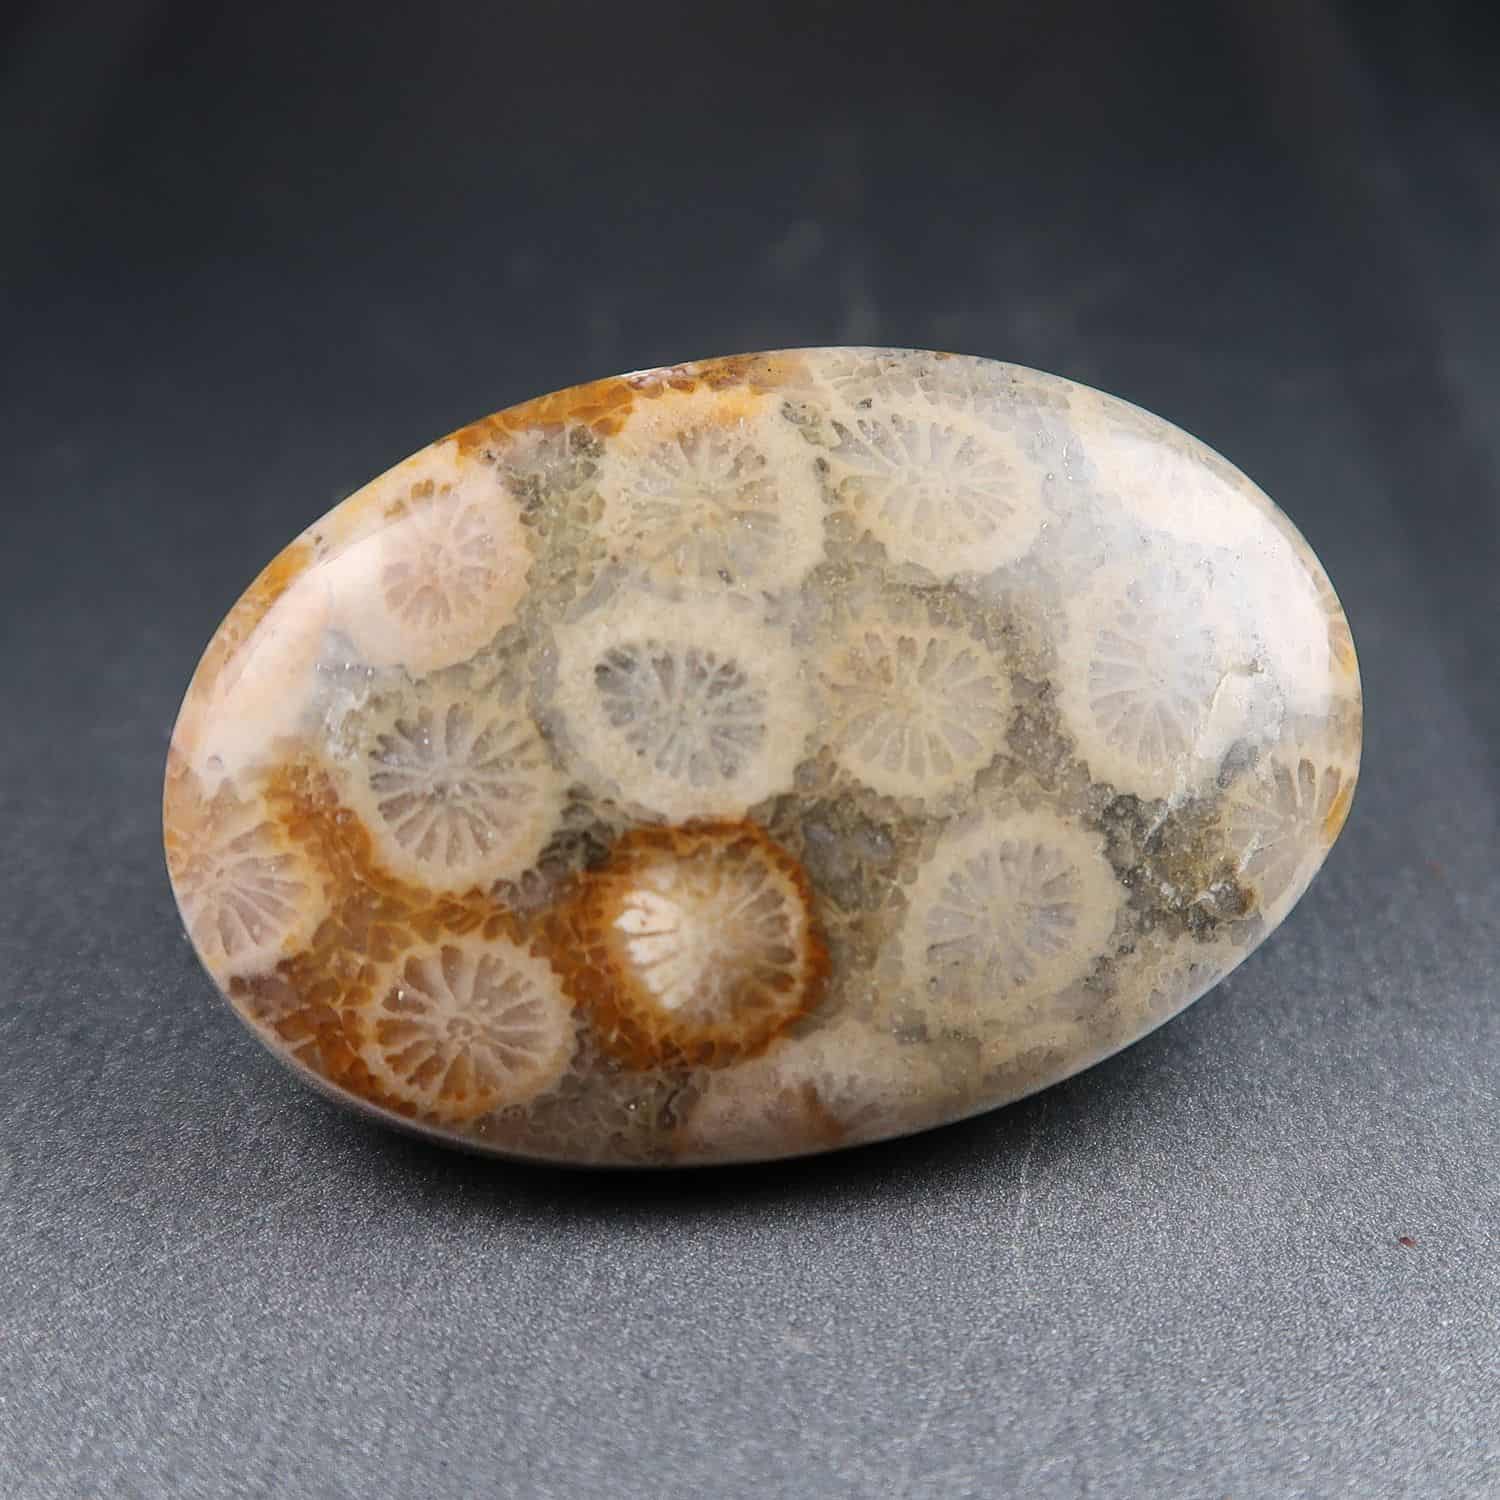 Spider Web Fossil Coral Cabochon Pair...Oval Cabochon...28x12x4 mm...26 Cts...#D9710